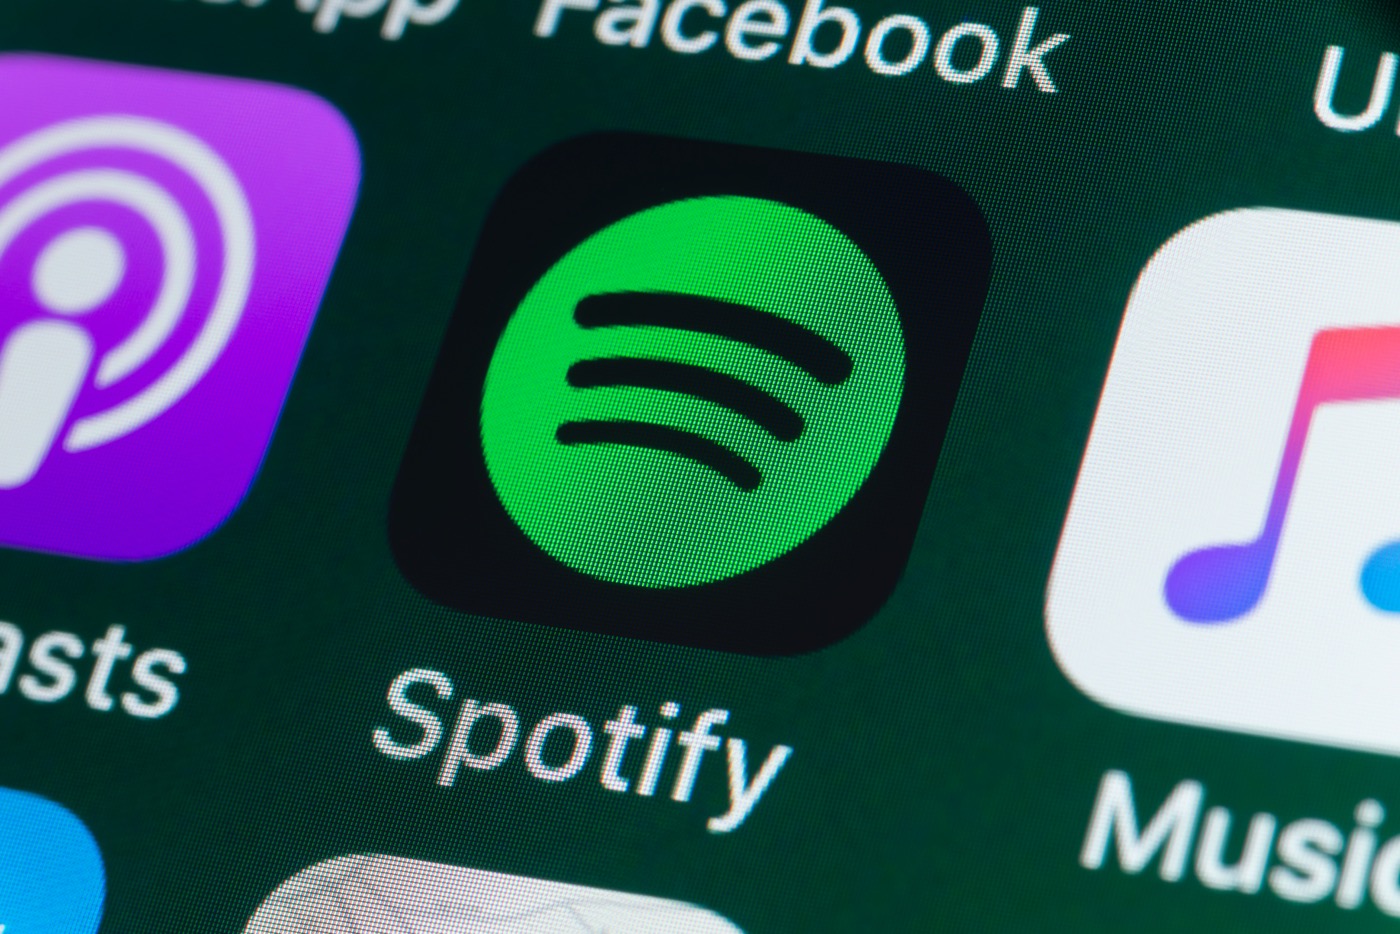 Spotify unveils the most streamed music and artists in 2022